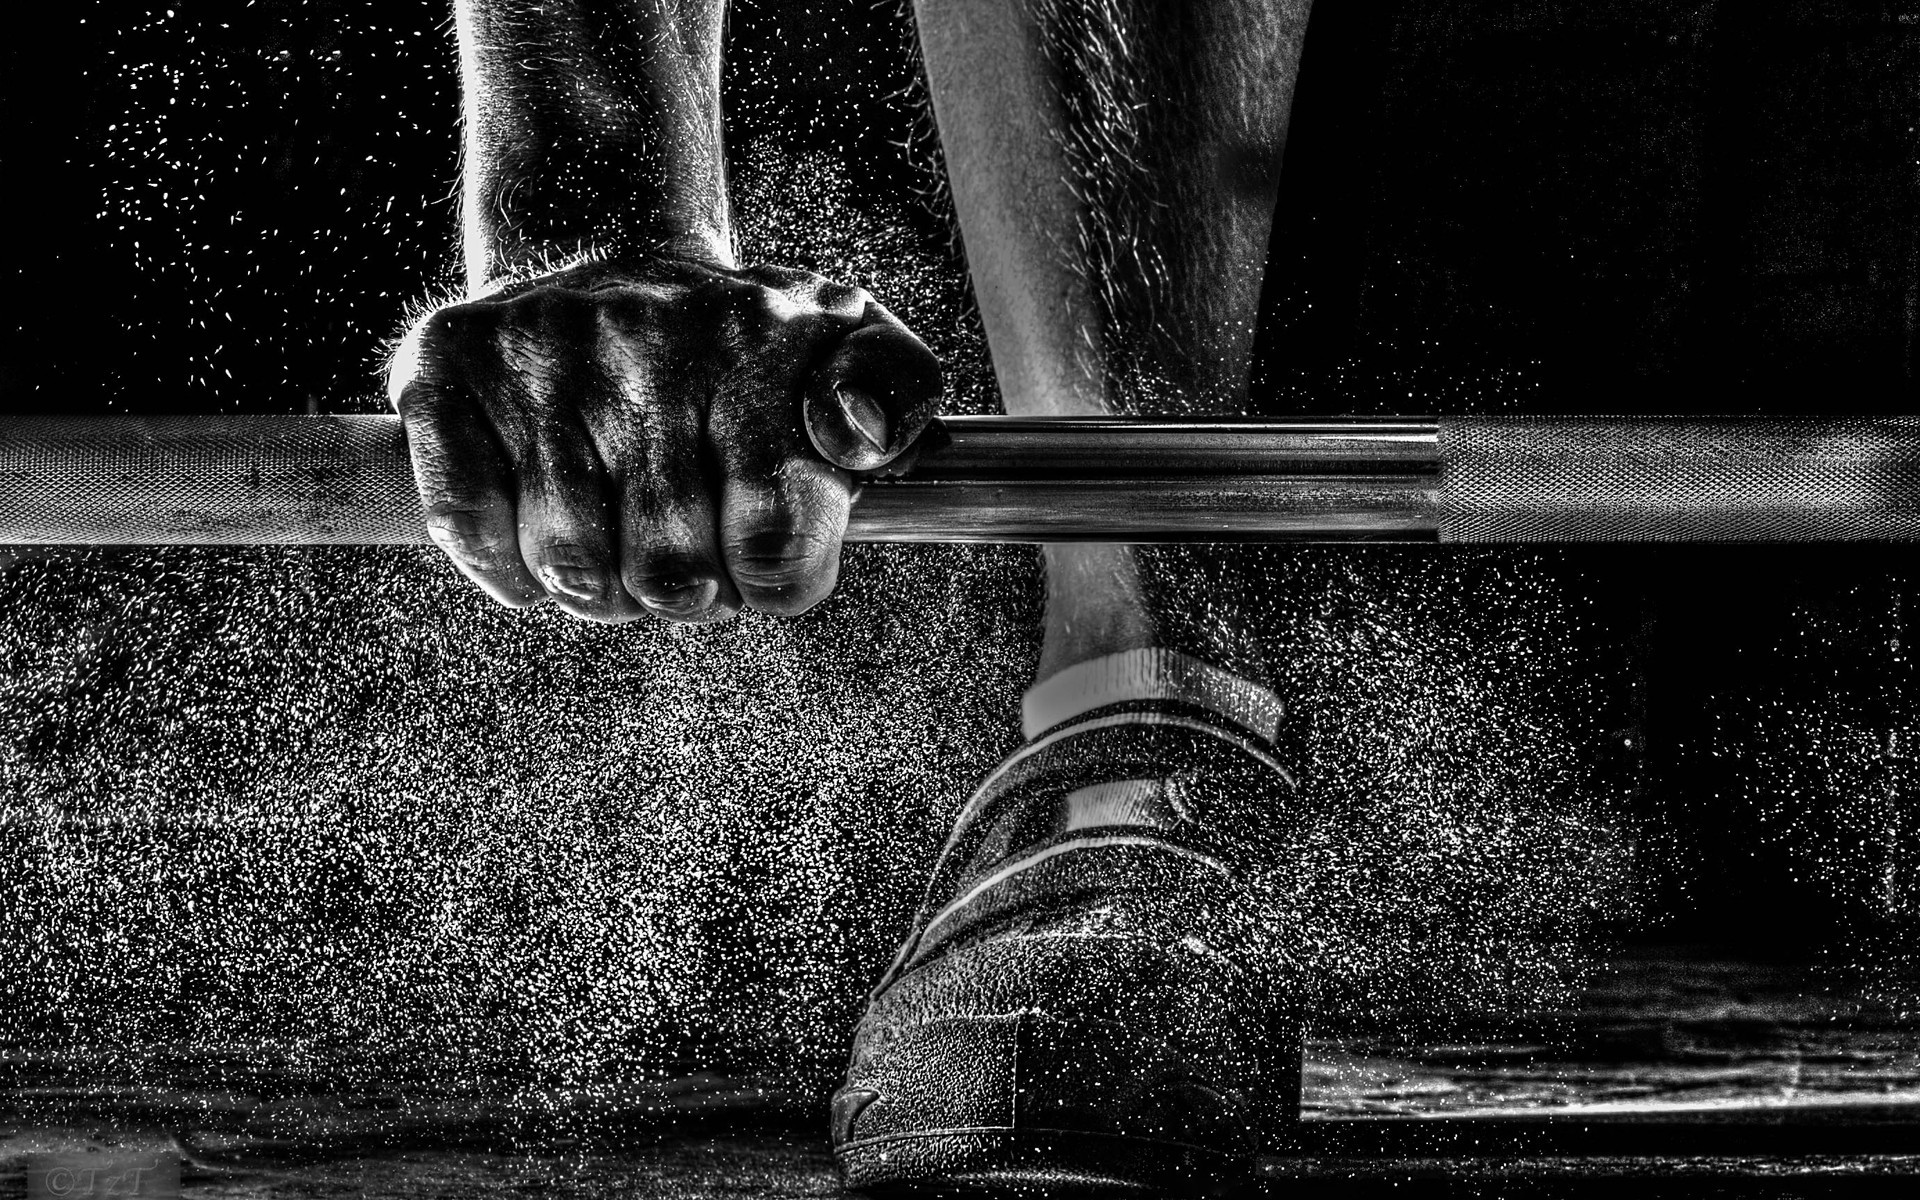 A Man Training Weight Lifting Barbell With Dust Flying - Road To Fitness - HD Wallpaper 